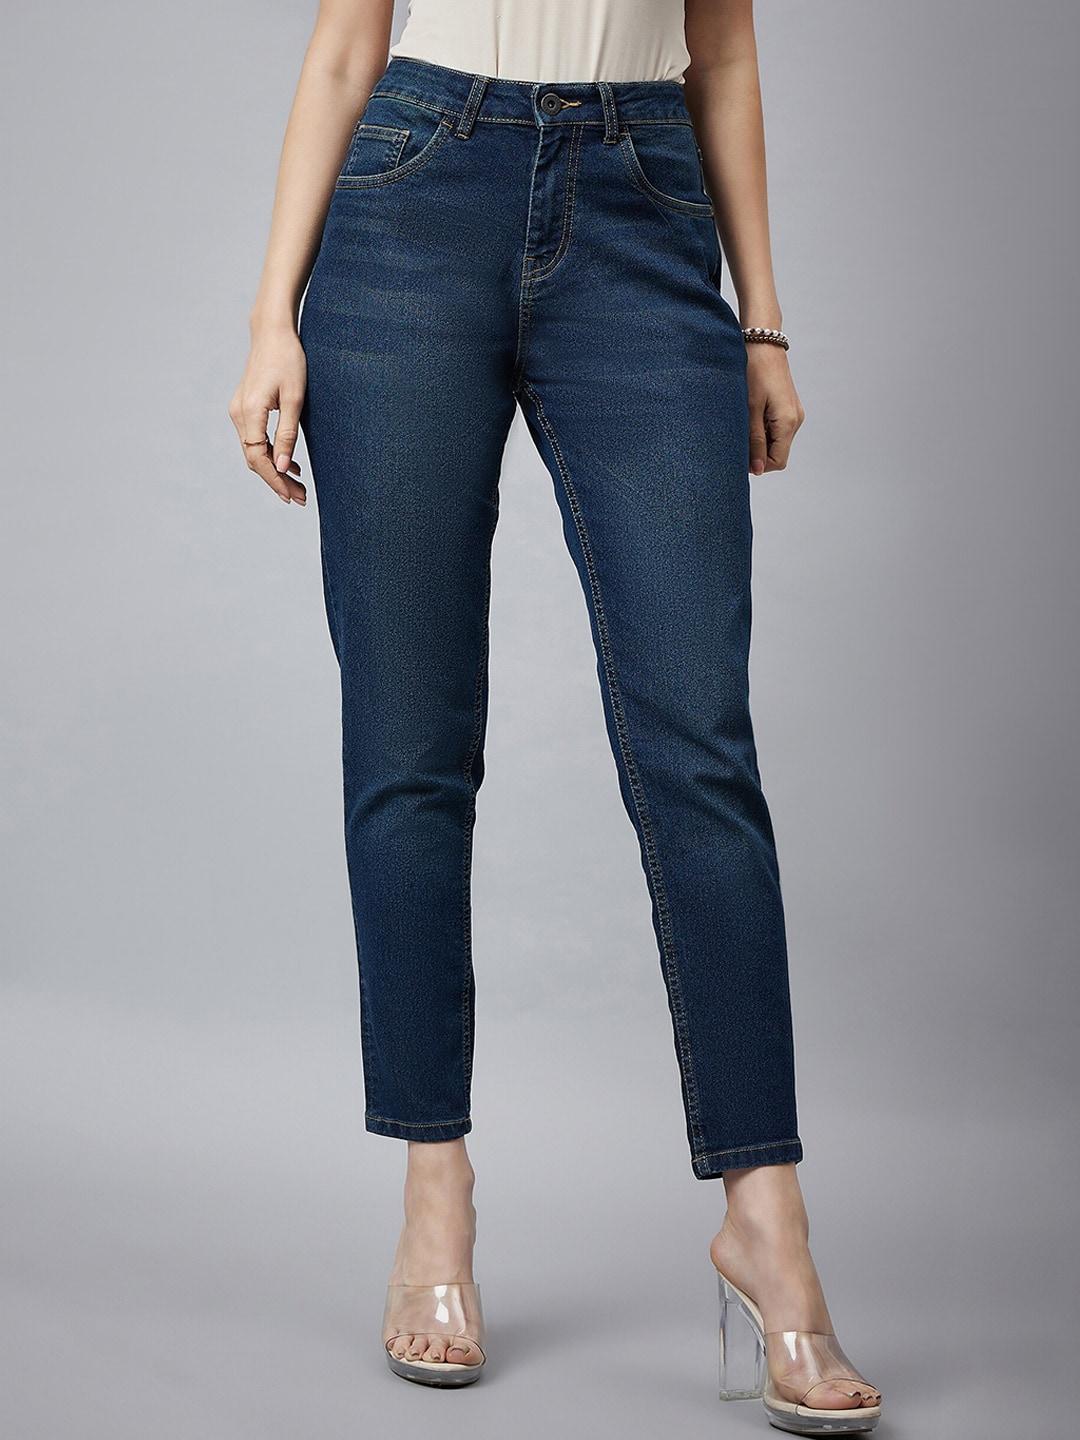 chemistry-women-comfort-high-rise-low-distress-stretchable-jeans